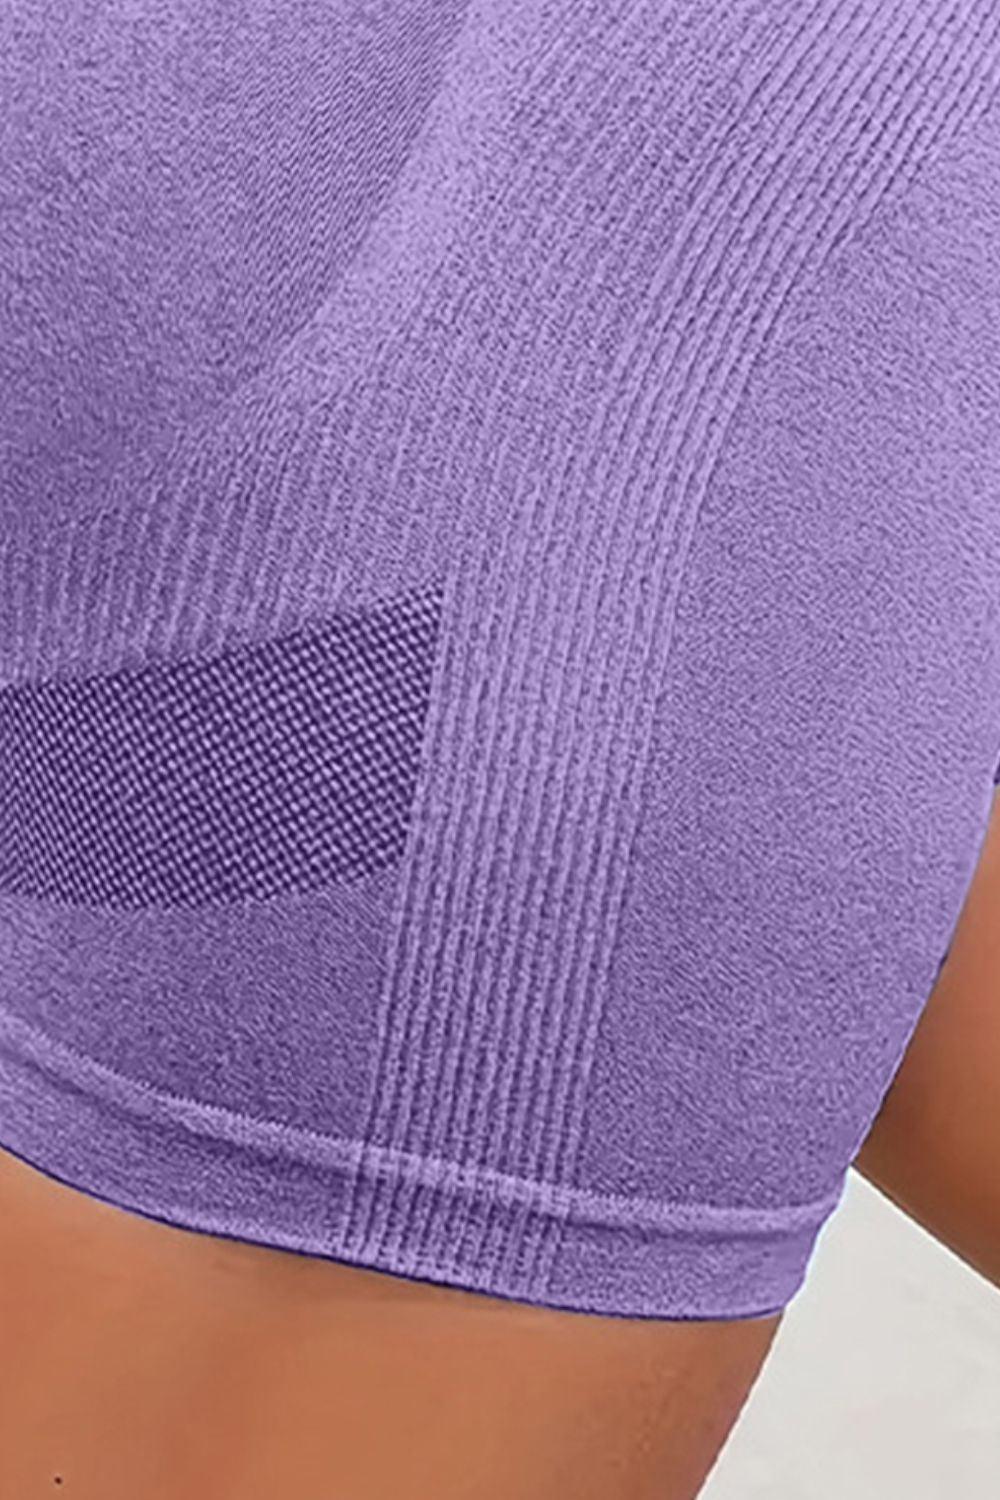 a close up of a person wearing a purple sports bra